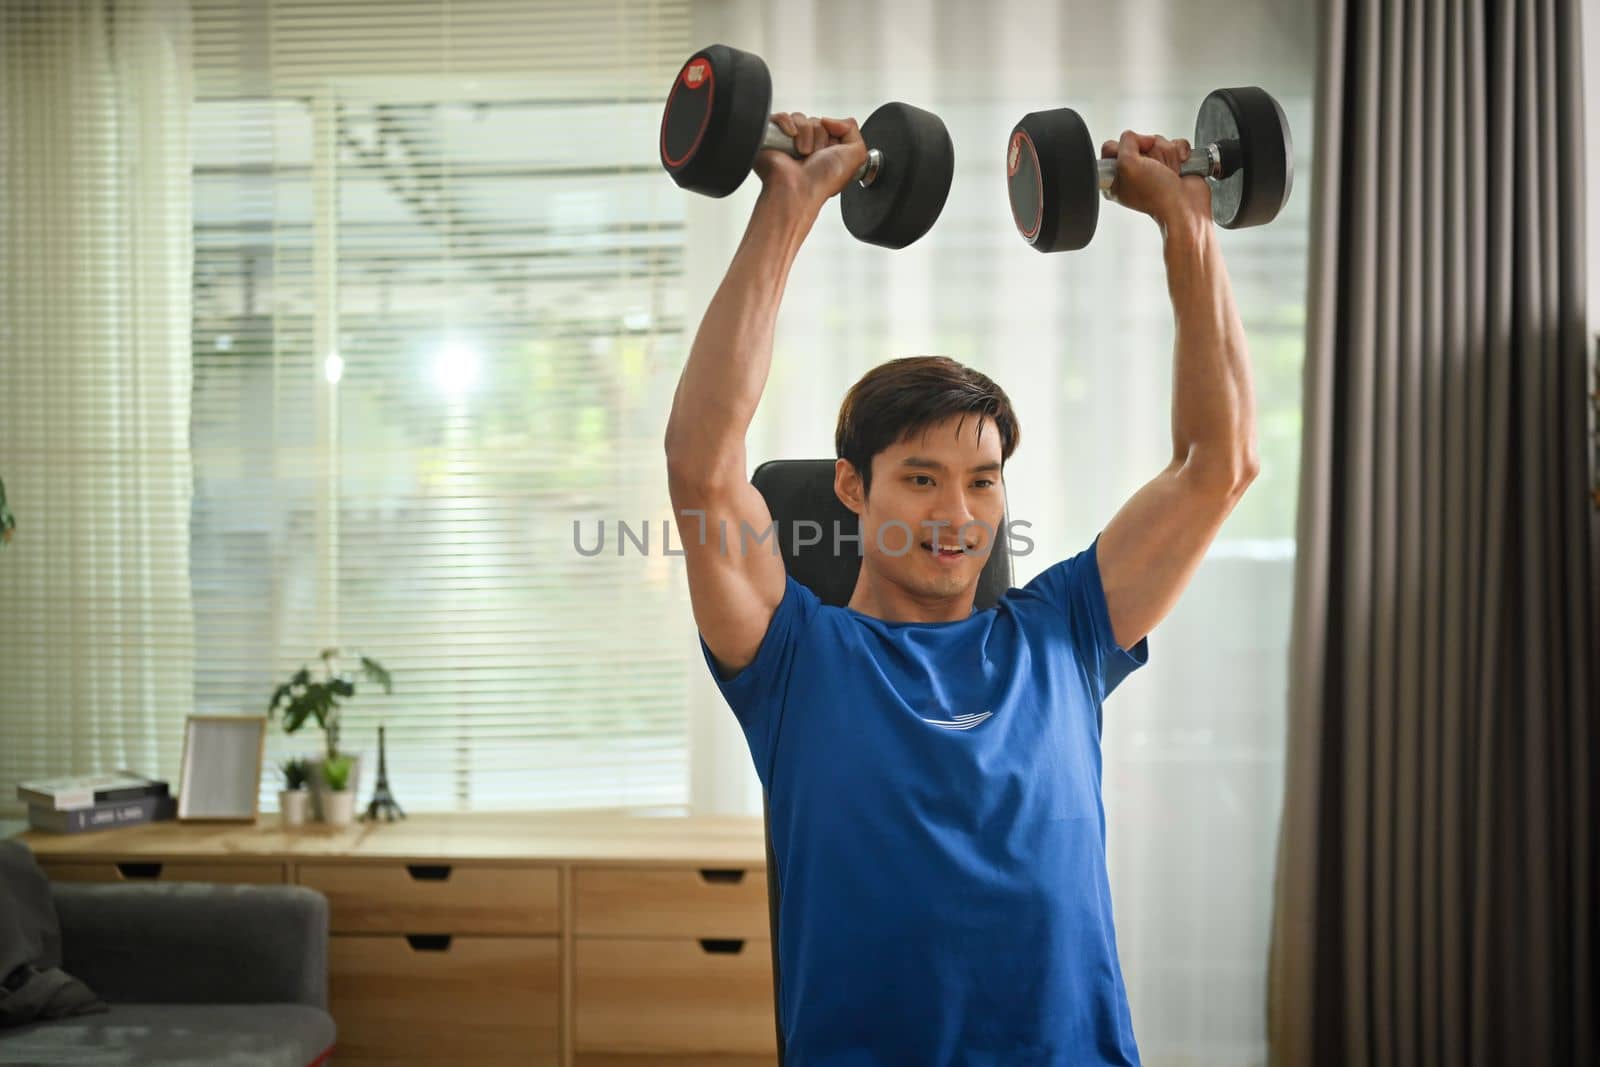 Strong athletic man doing dumbbell workout in bright living room. Fitness, sport and healthy lifestyle concept.